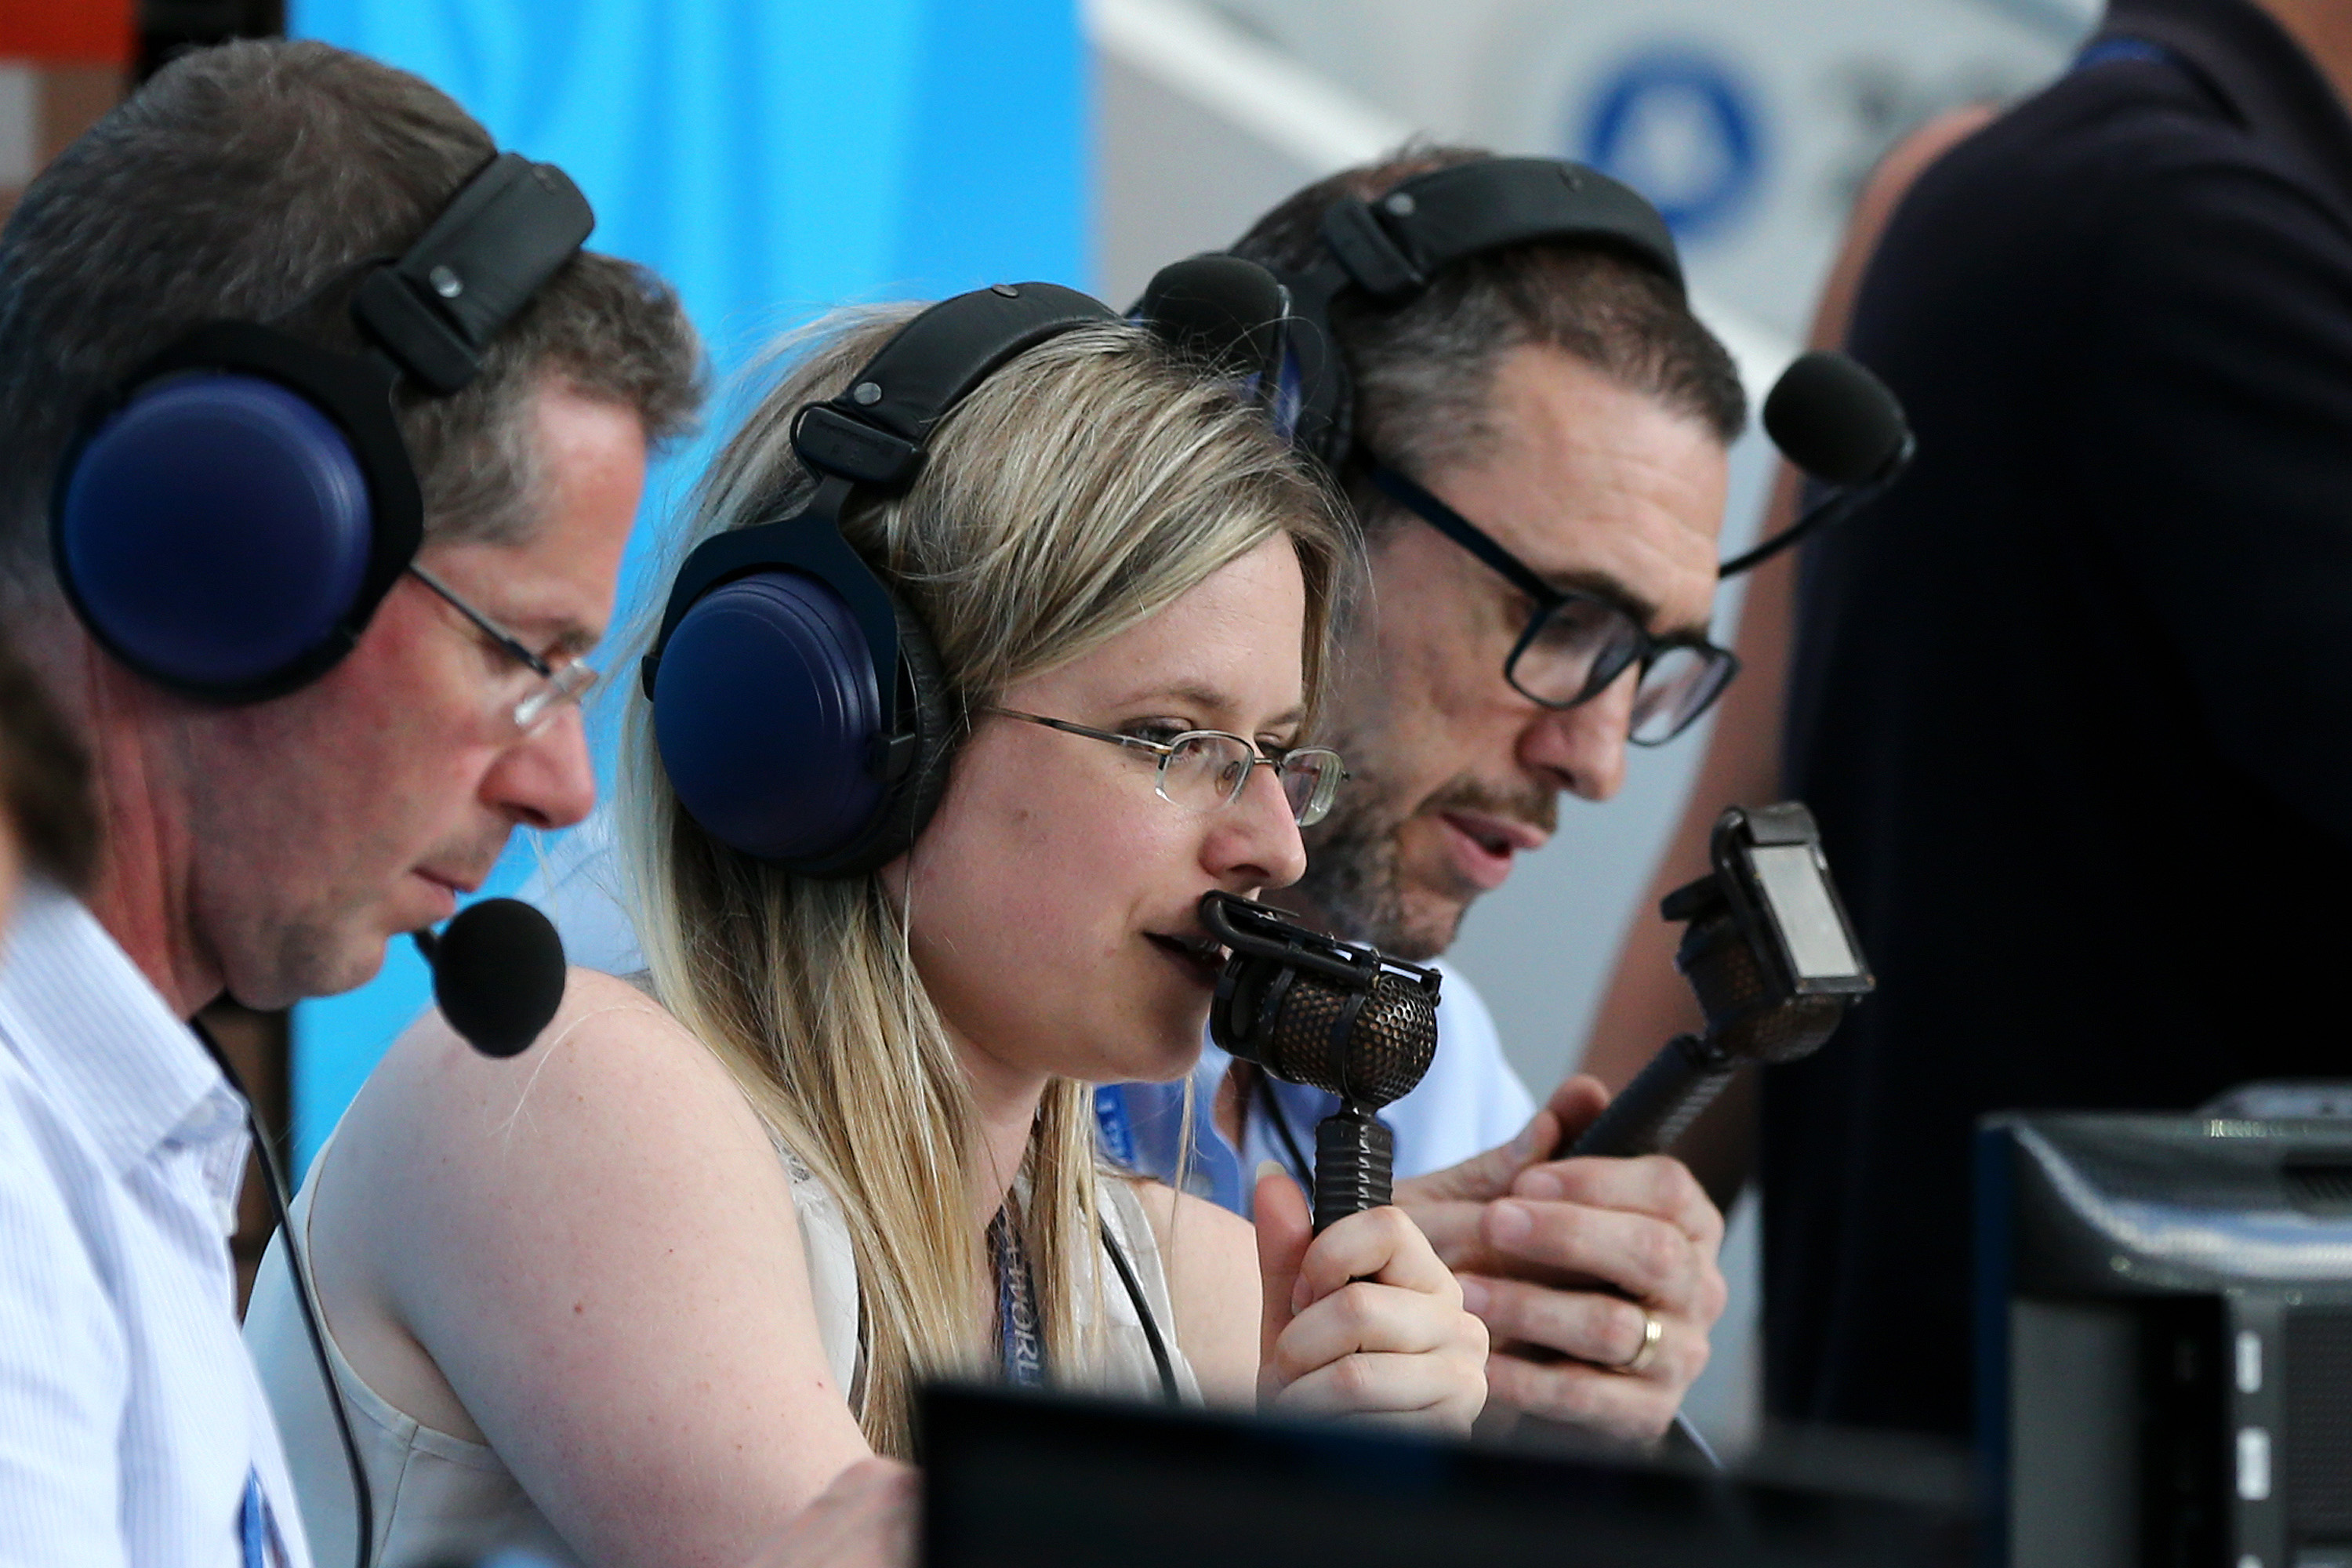 Vicki Sparks commentates for BBC during the 2018 FIFA World Cup Russia group B match between Portugal and Morocco at Luzhniki Stadium on June 20, 2018 in Moscow, Russia. (Maddie Meyer—Getty Images)